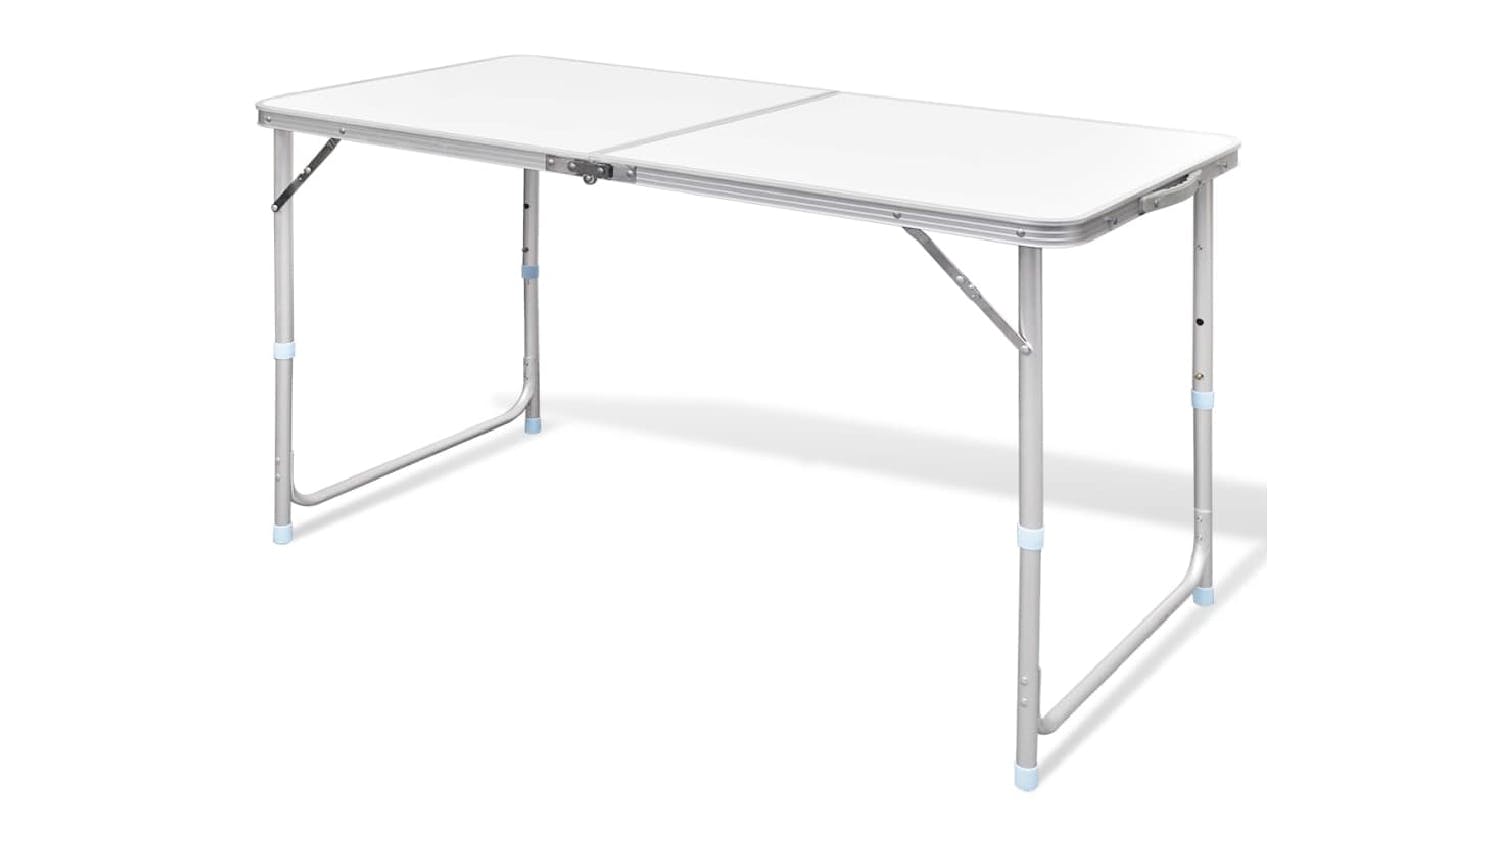 NNEVL Camping Table Folding Height Adjustable 120 x 60cm